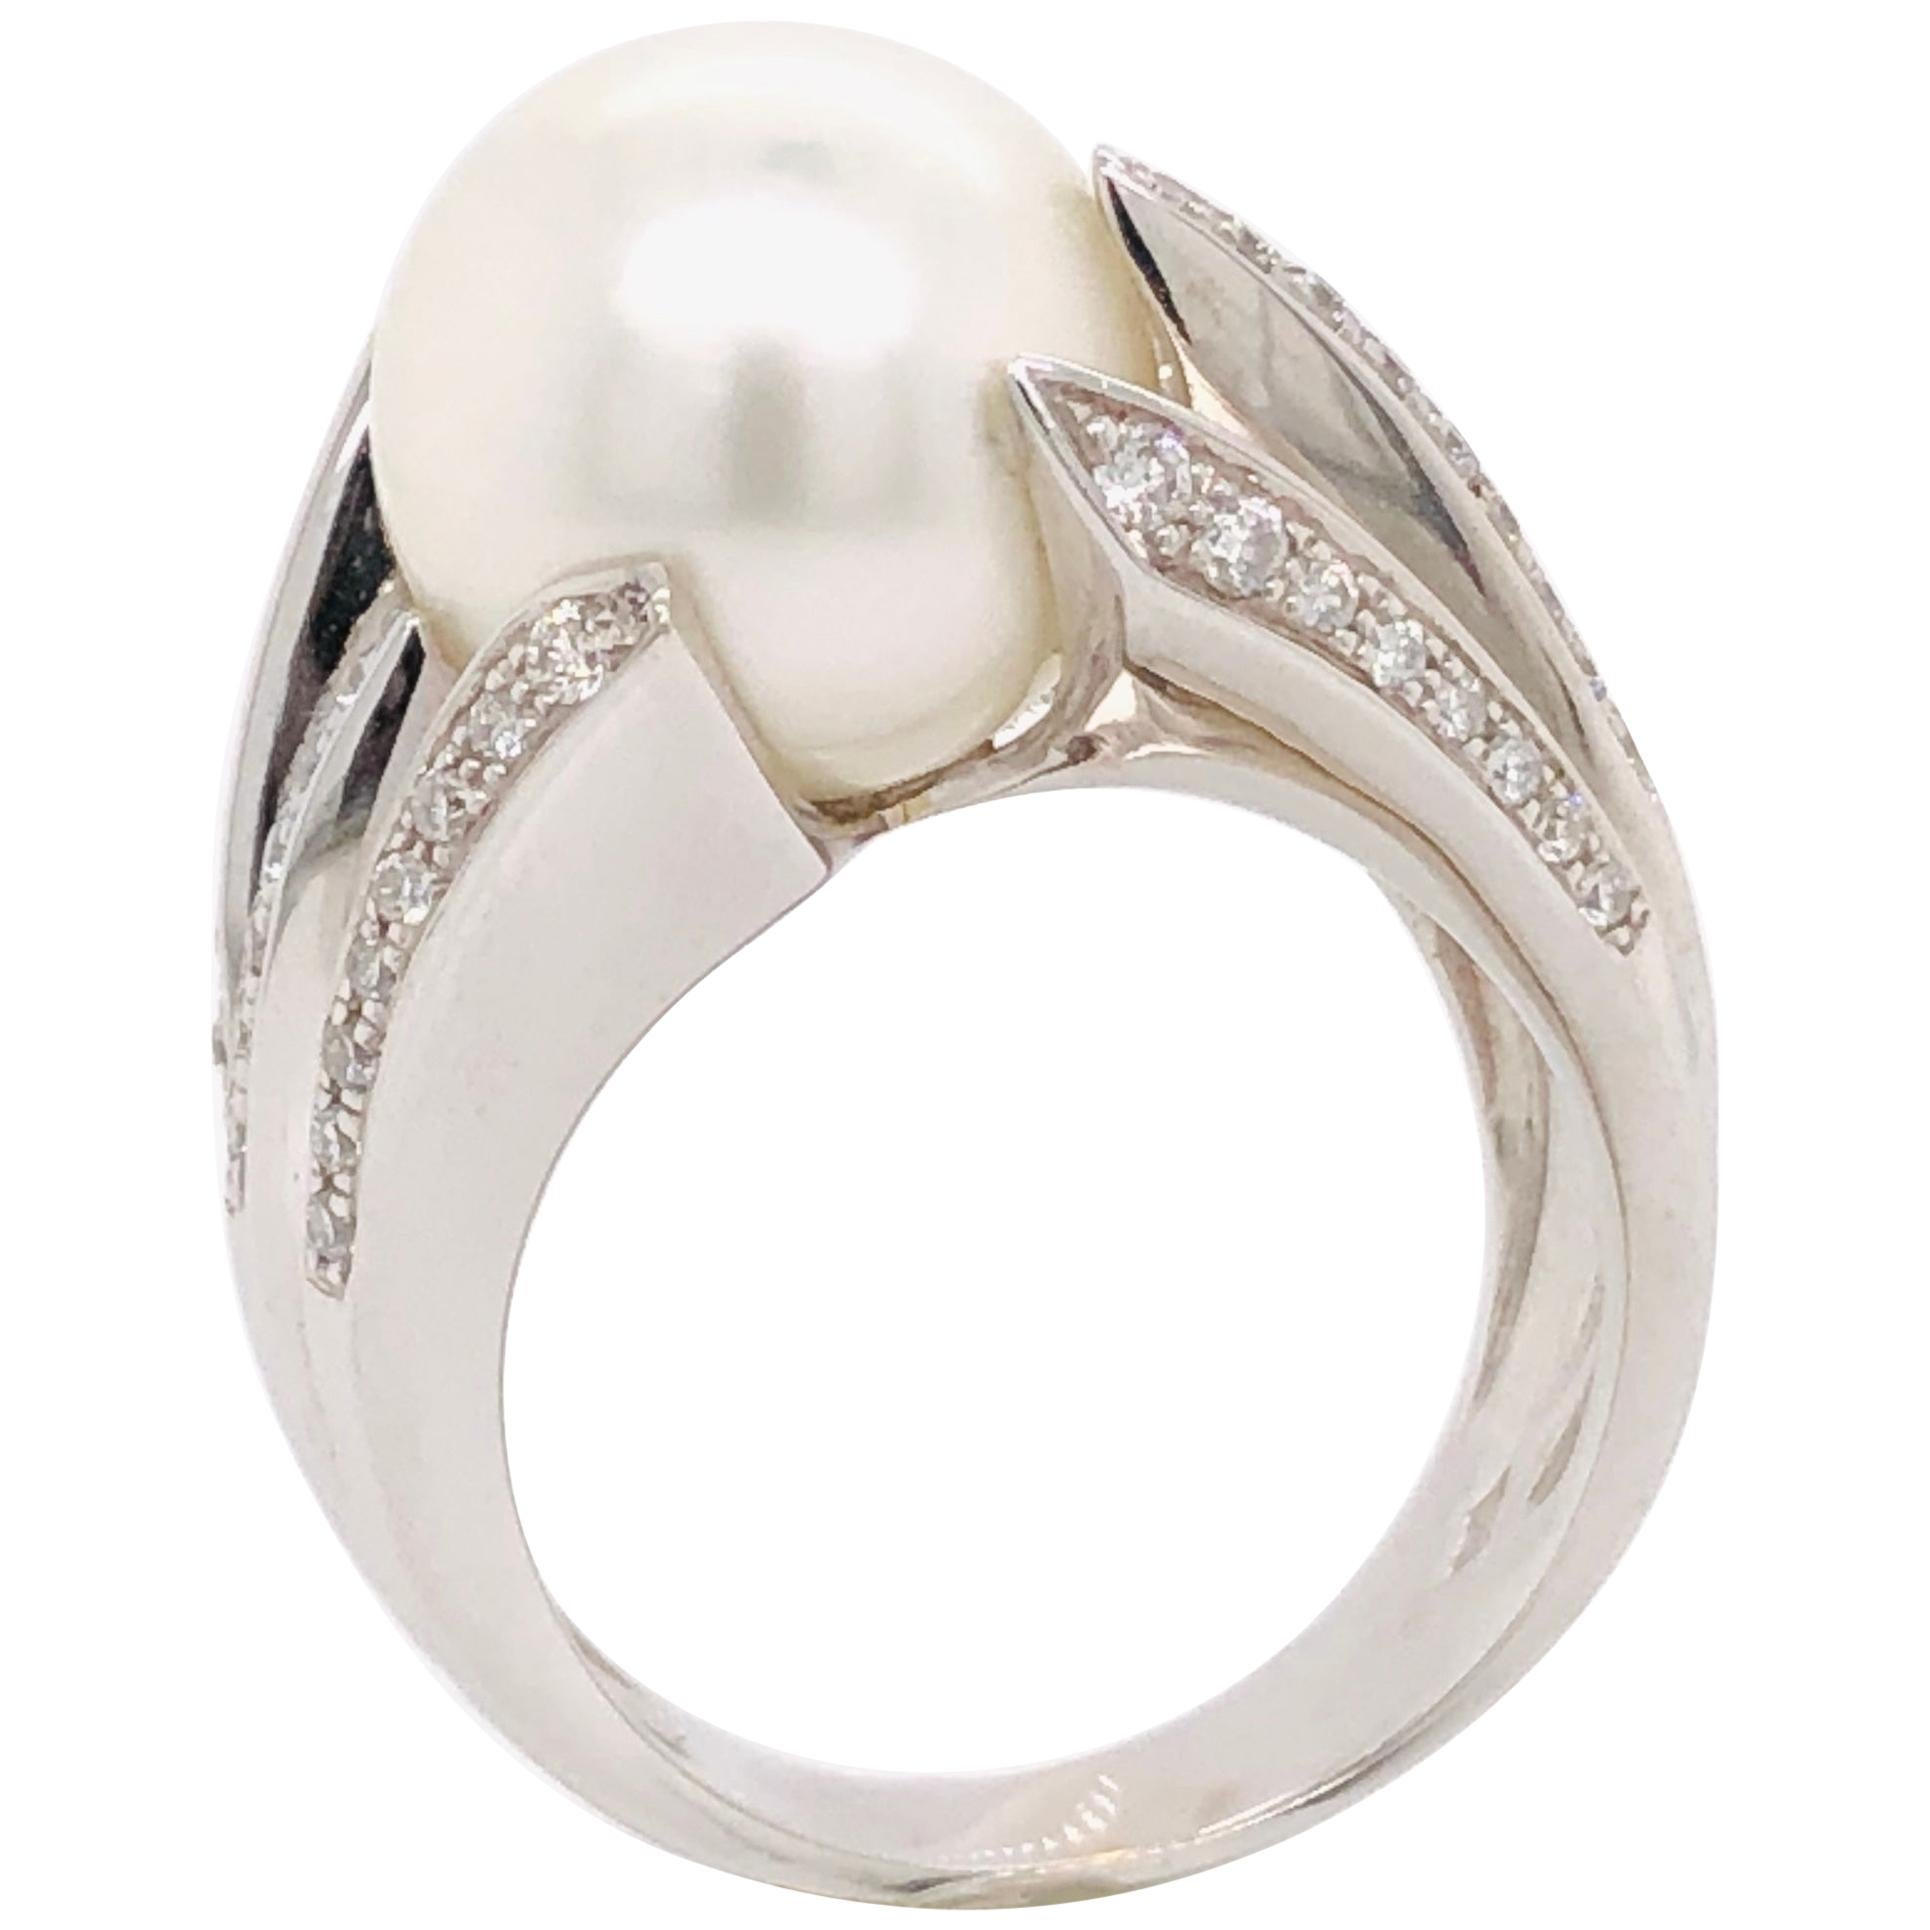 White Cultured Pearl and White Diamonds Ring.
White Gold 18 Carat
Cultured Pearl 2,47
Diamonds 0,40
French Size : 54
US Sise : 6 3/4
British Size : N
Weight of gold : 12.06